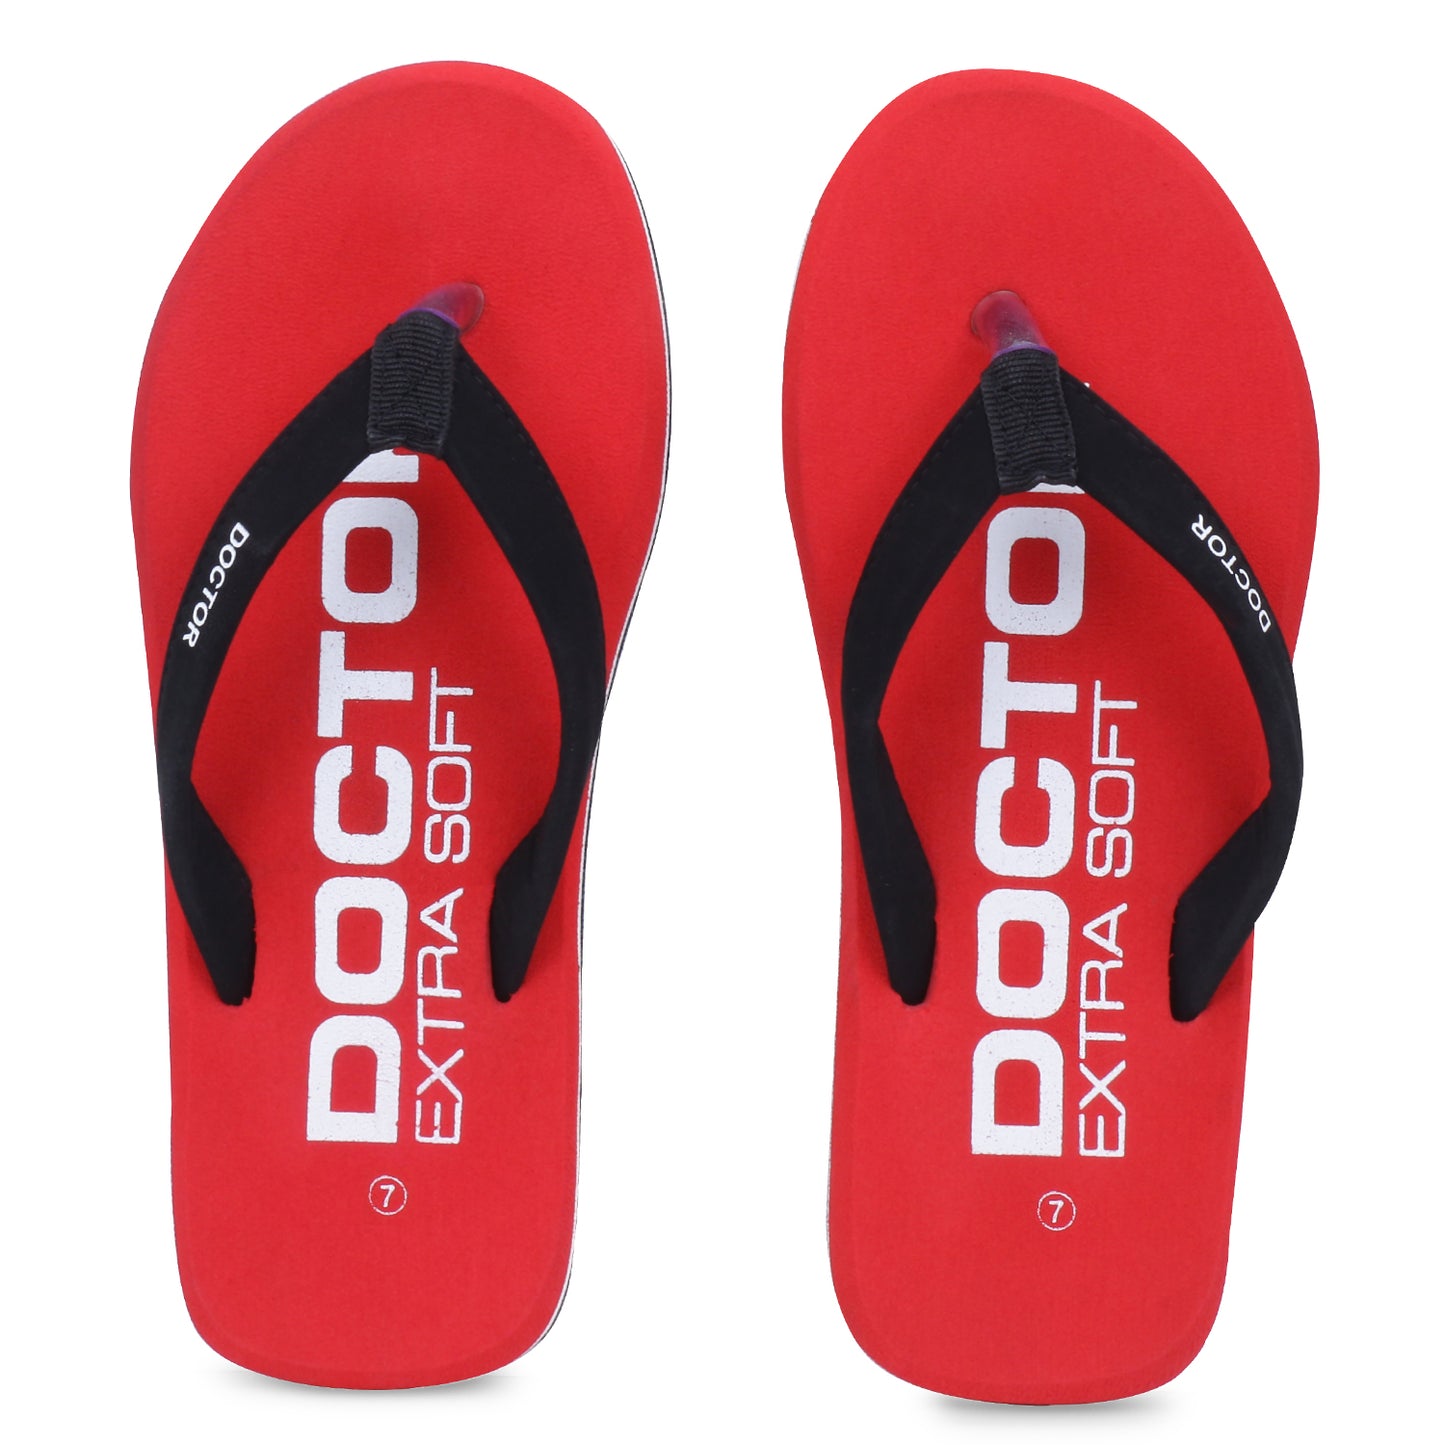 DOCTOR EXTRA SOFT D-27 House Slipper for Men's Ortho Care Ideal For Cracked Heels & Blistered Feet Having Soft Insole